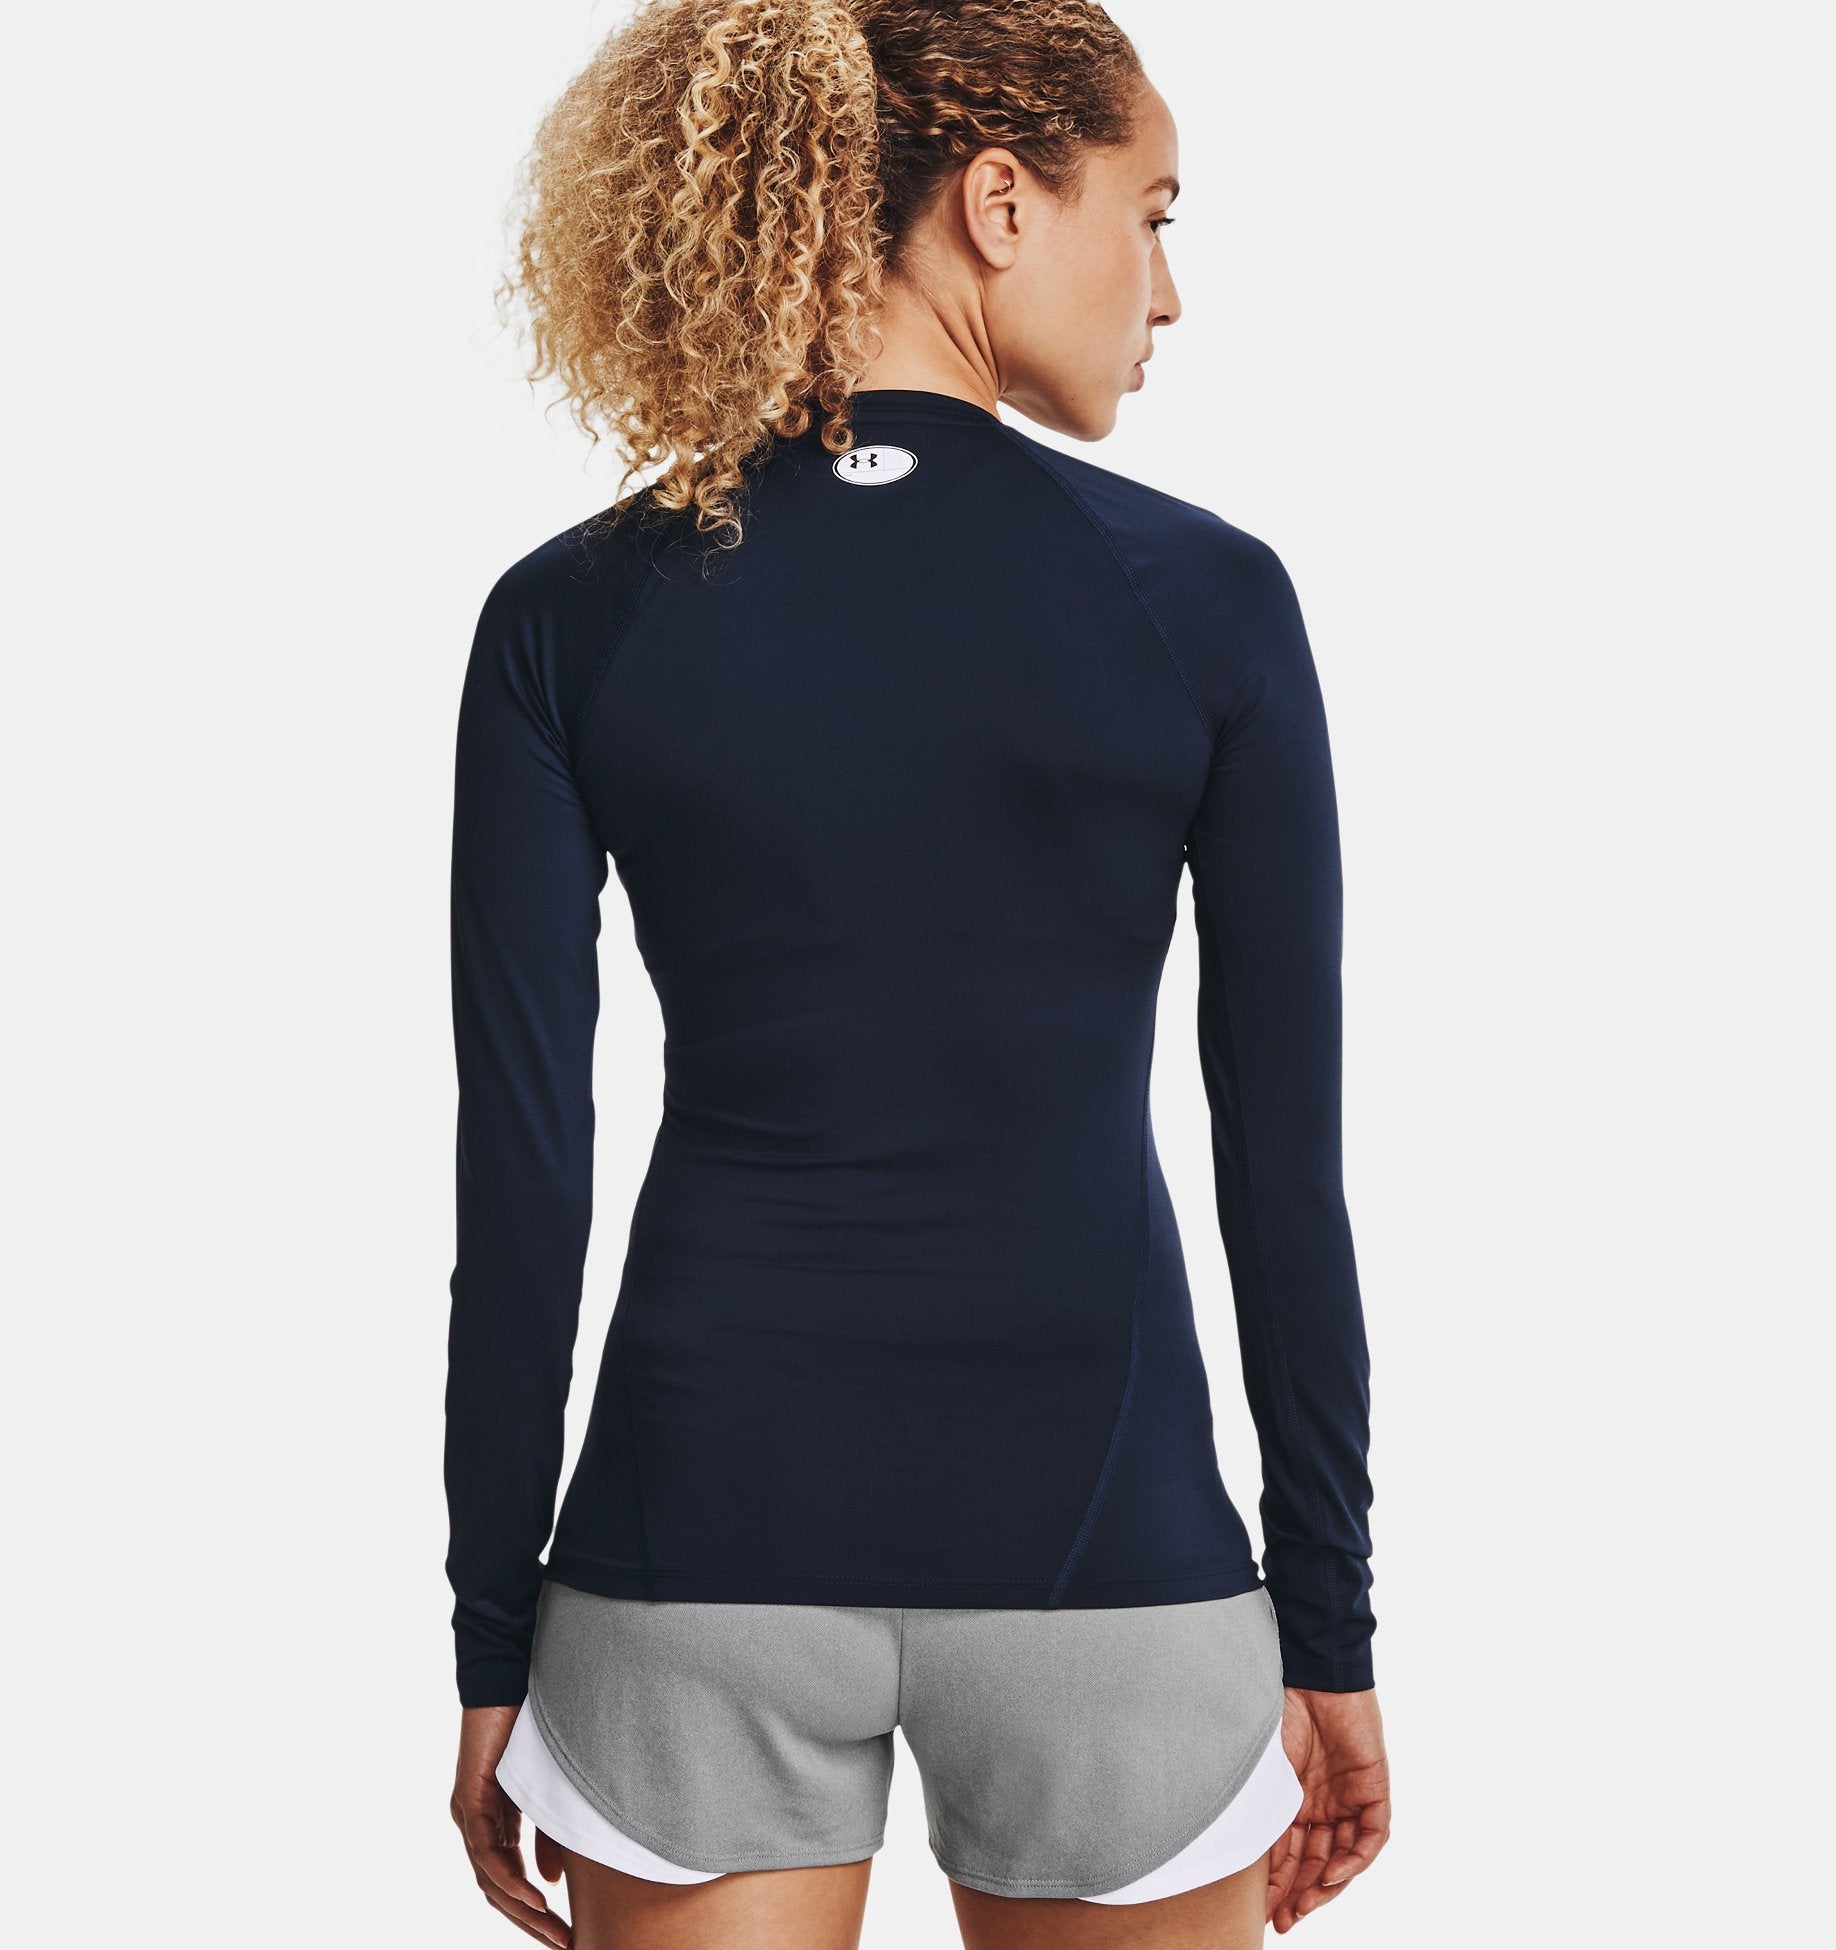 Under Armour HeatGear® Armour - Compression Longsleeve Compression Shirts